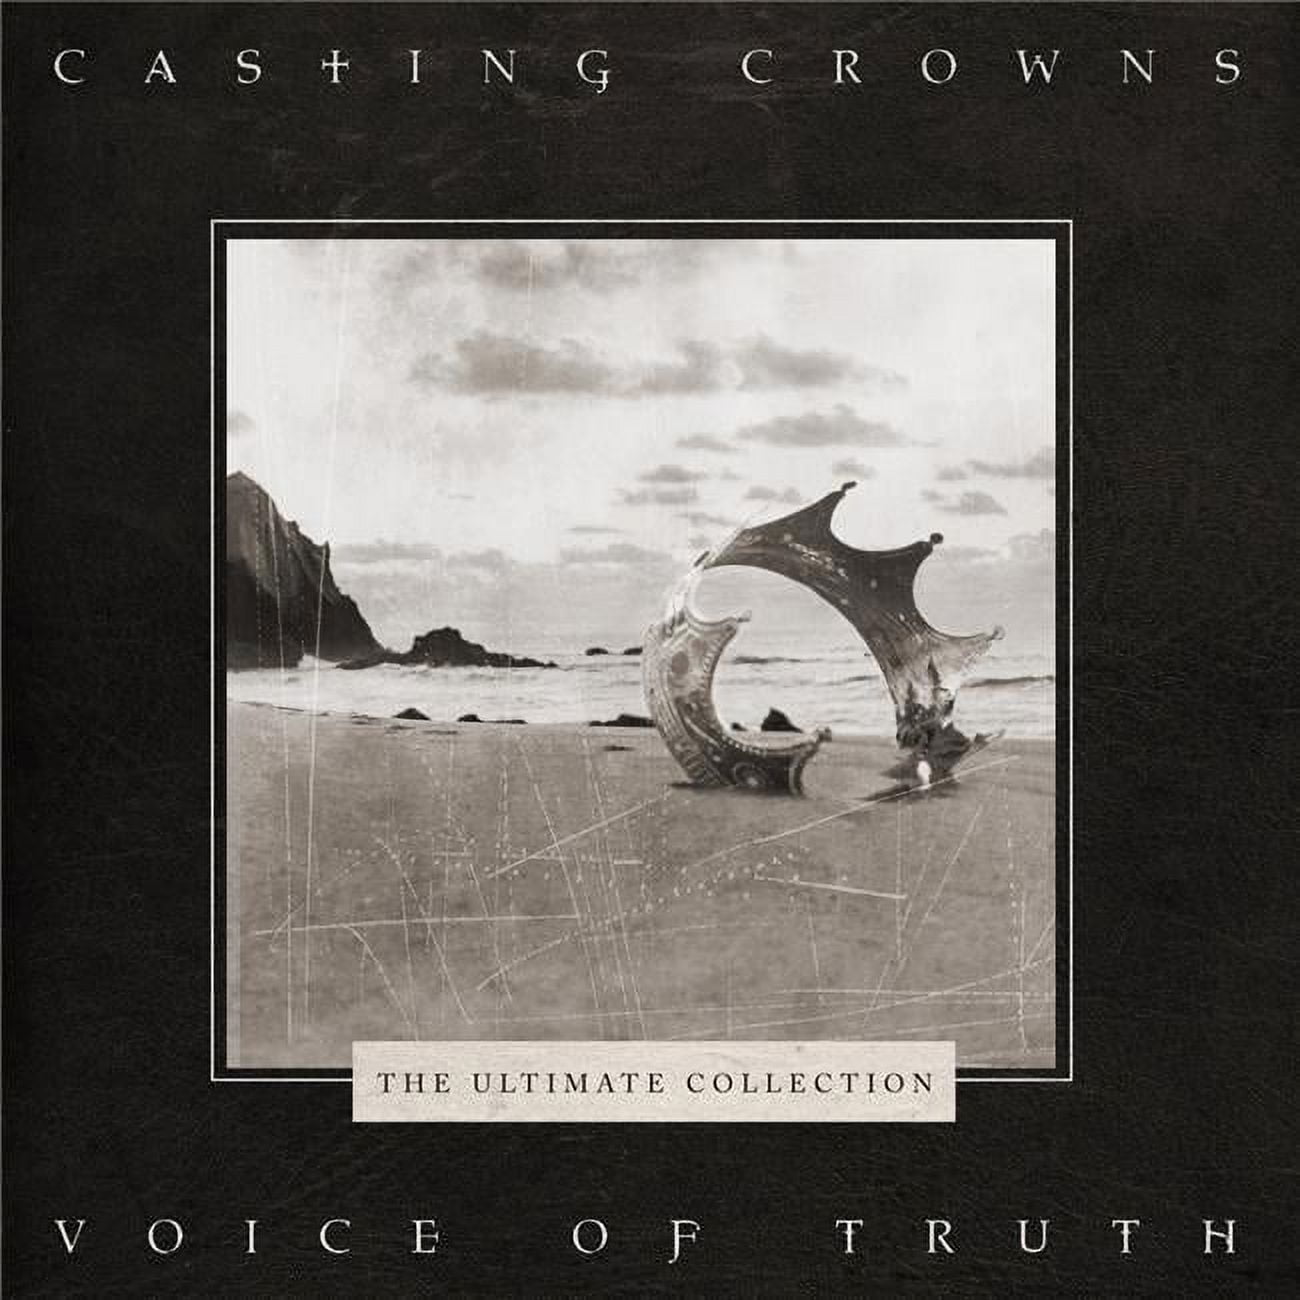 Beach Street Records 140224 Audio Cd - Voice Of Truth The Ultimate Collection